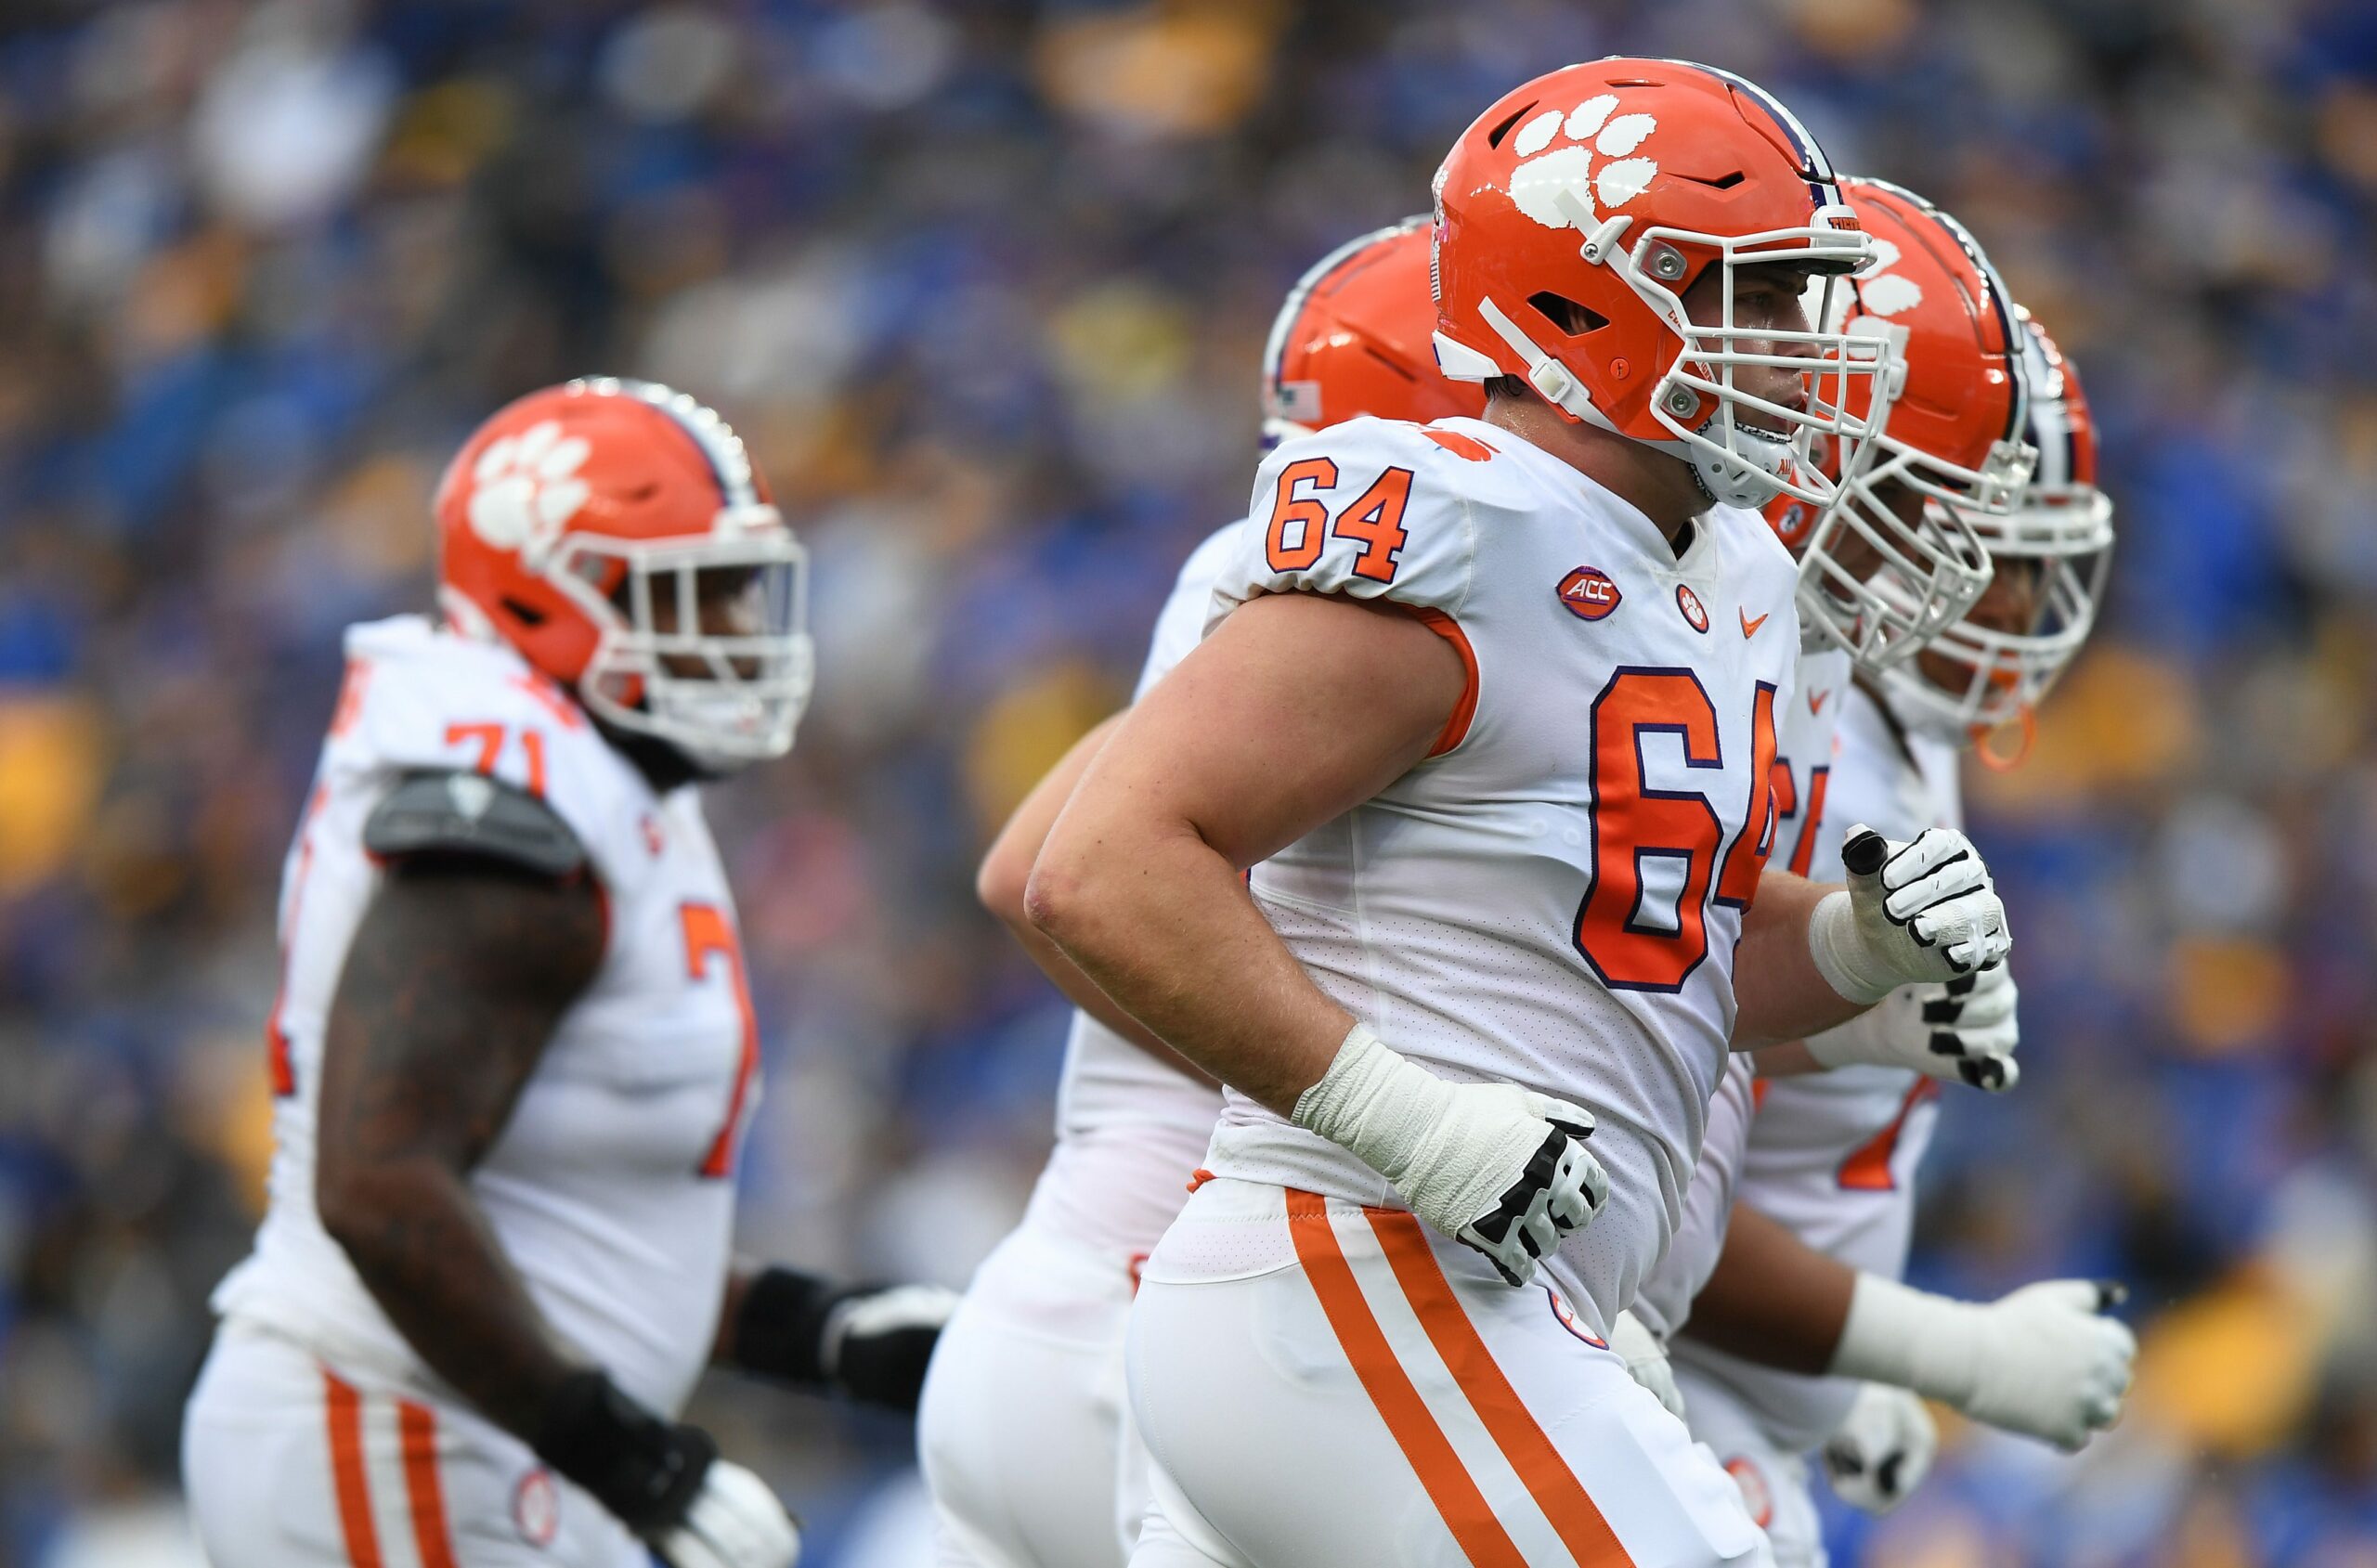 ‘Big evaluation week’ as decisions loom on Clemson’s offensive line